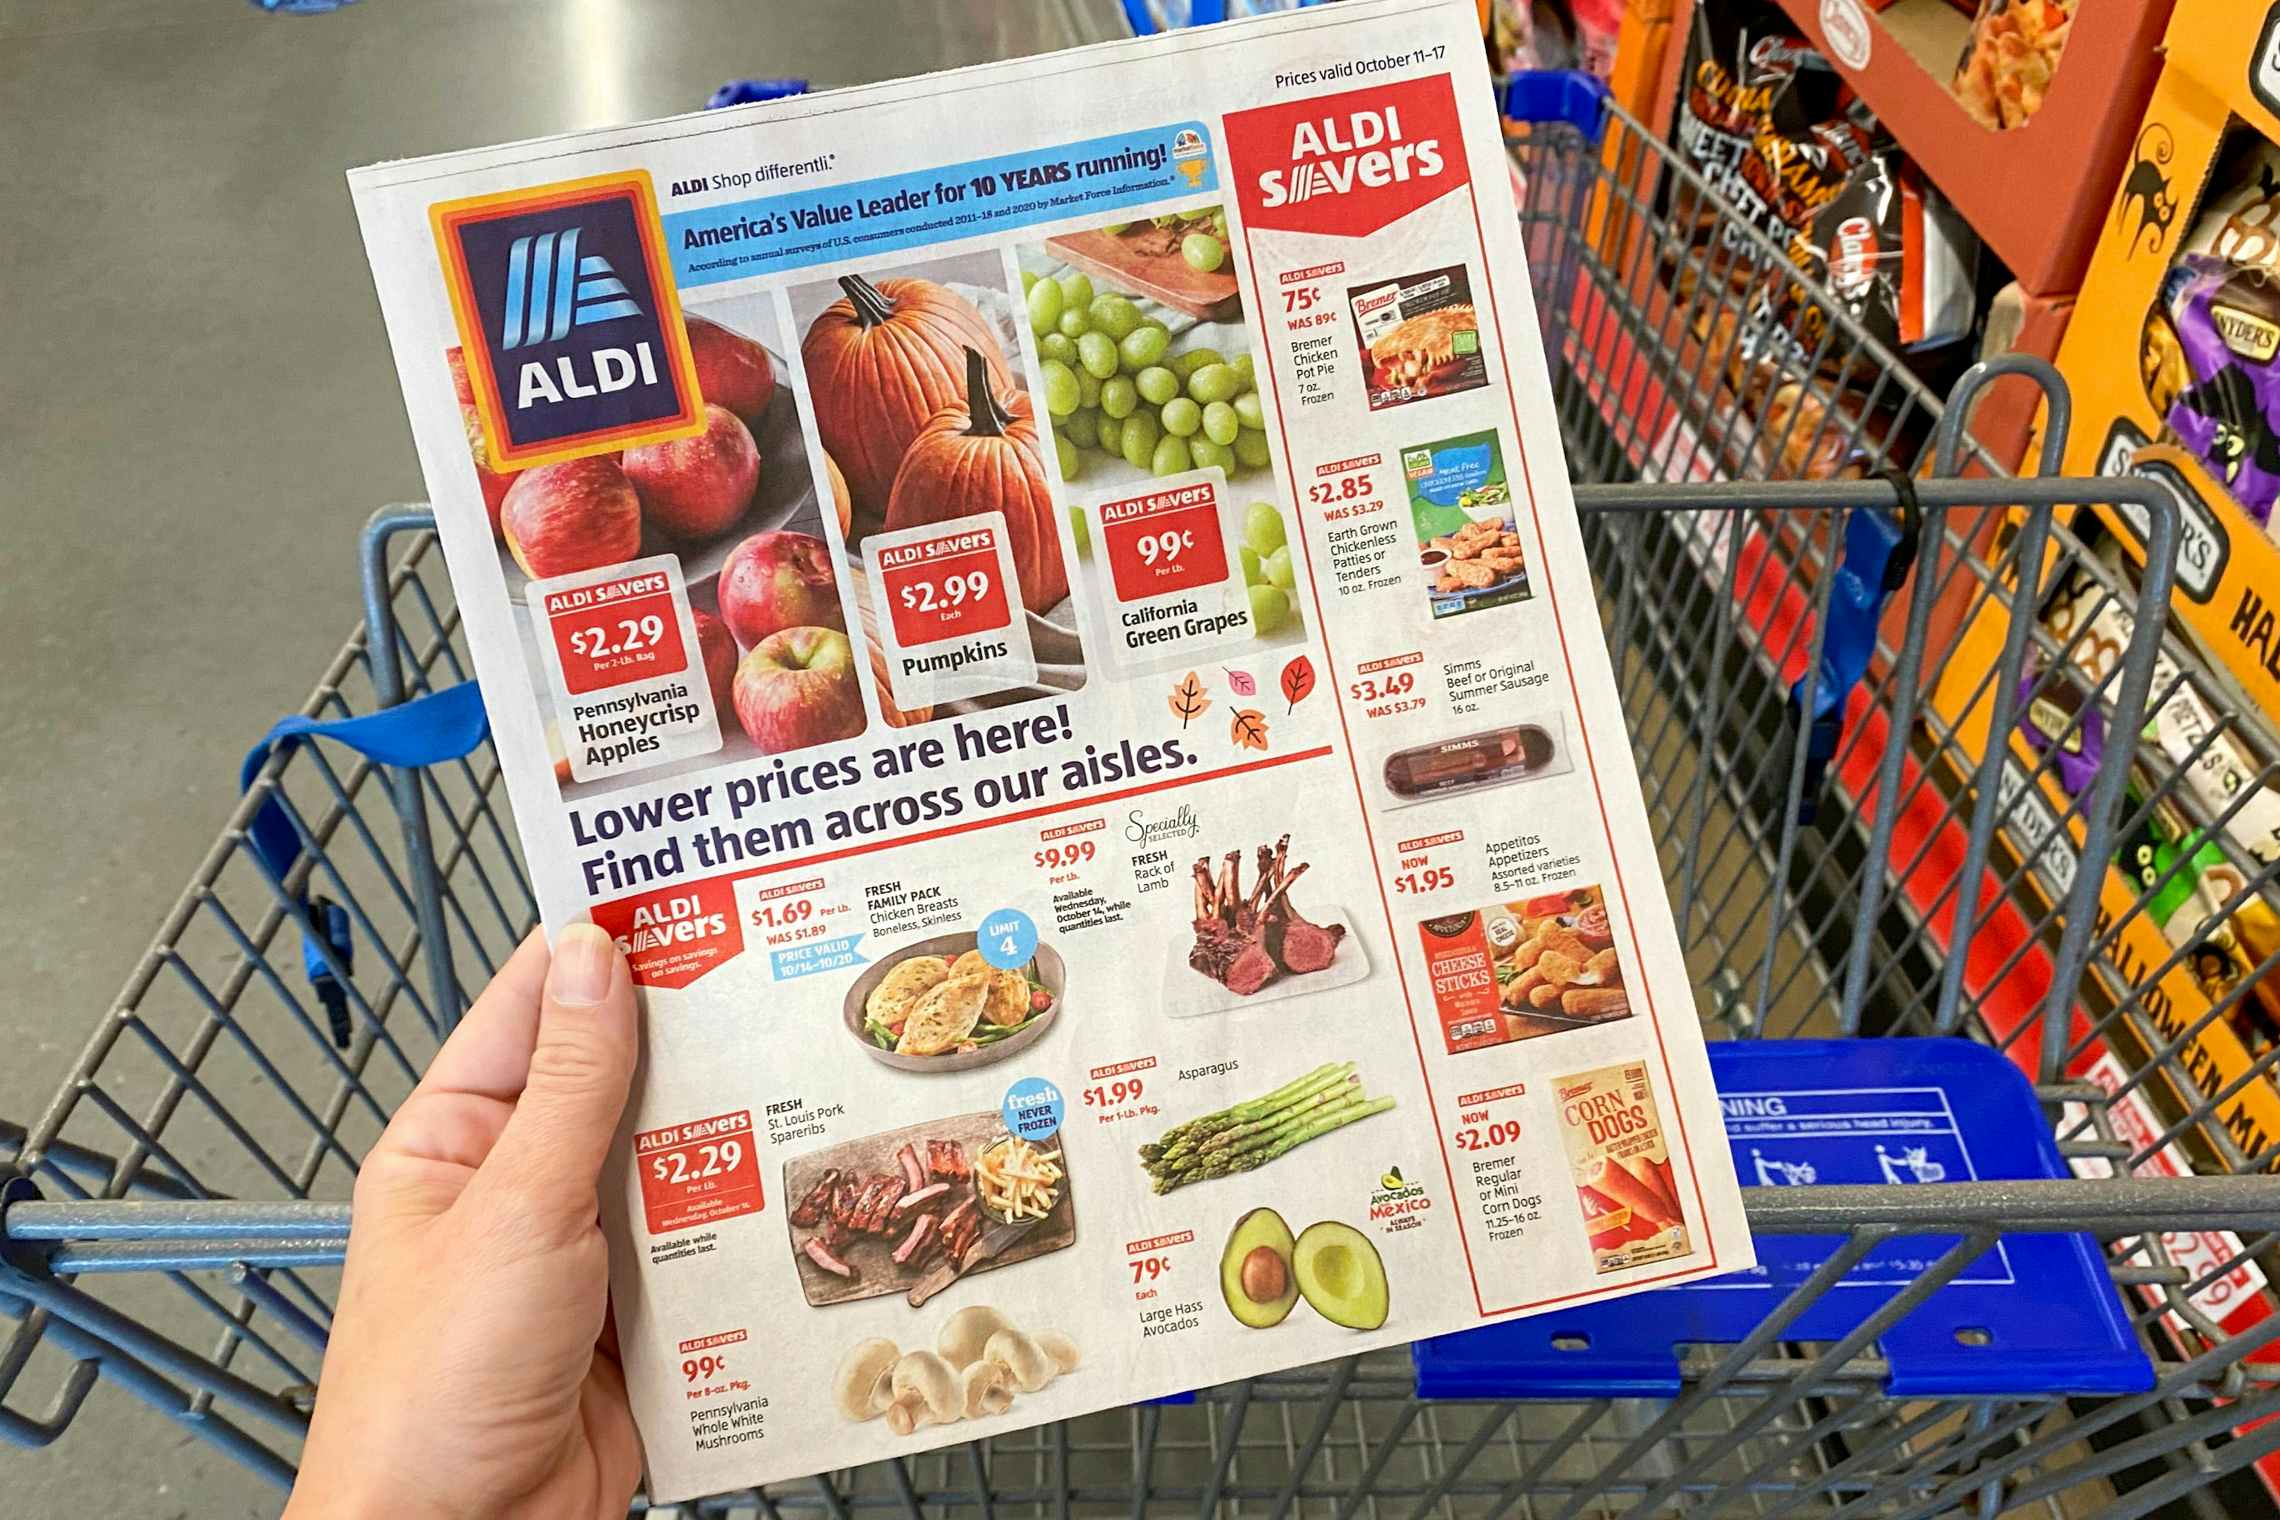 Discounted grocery deals